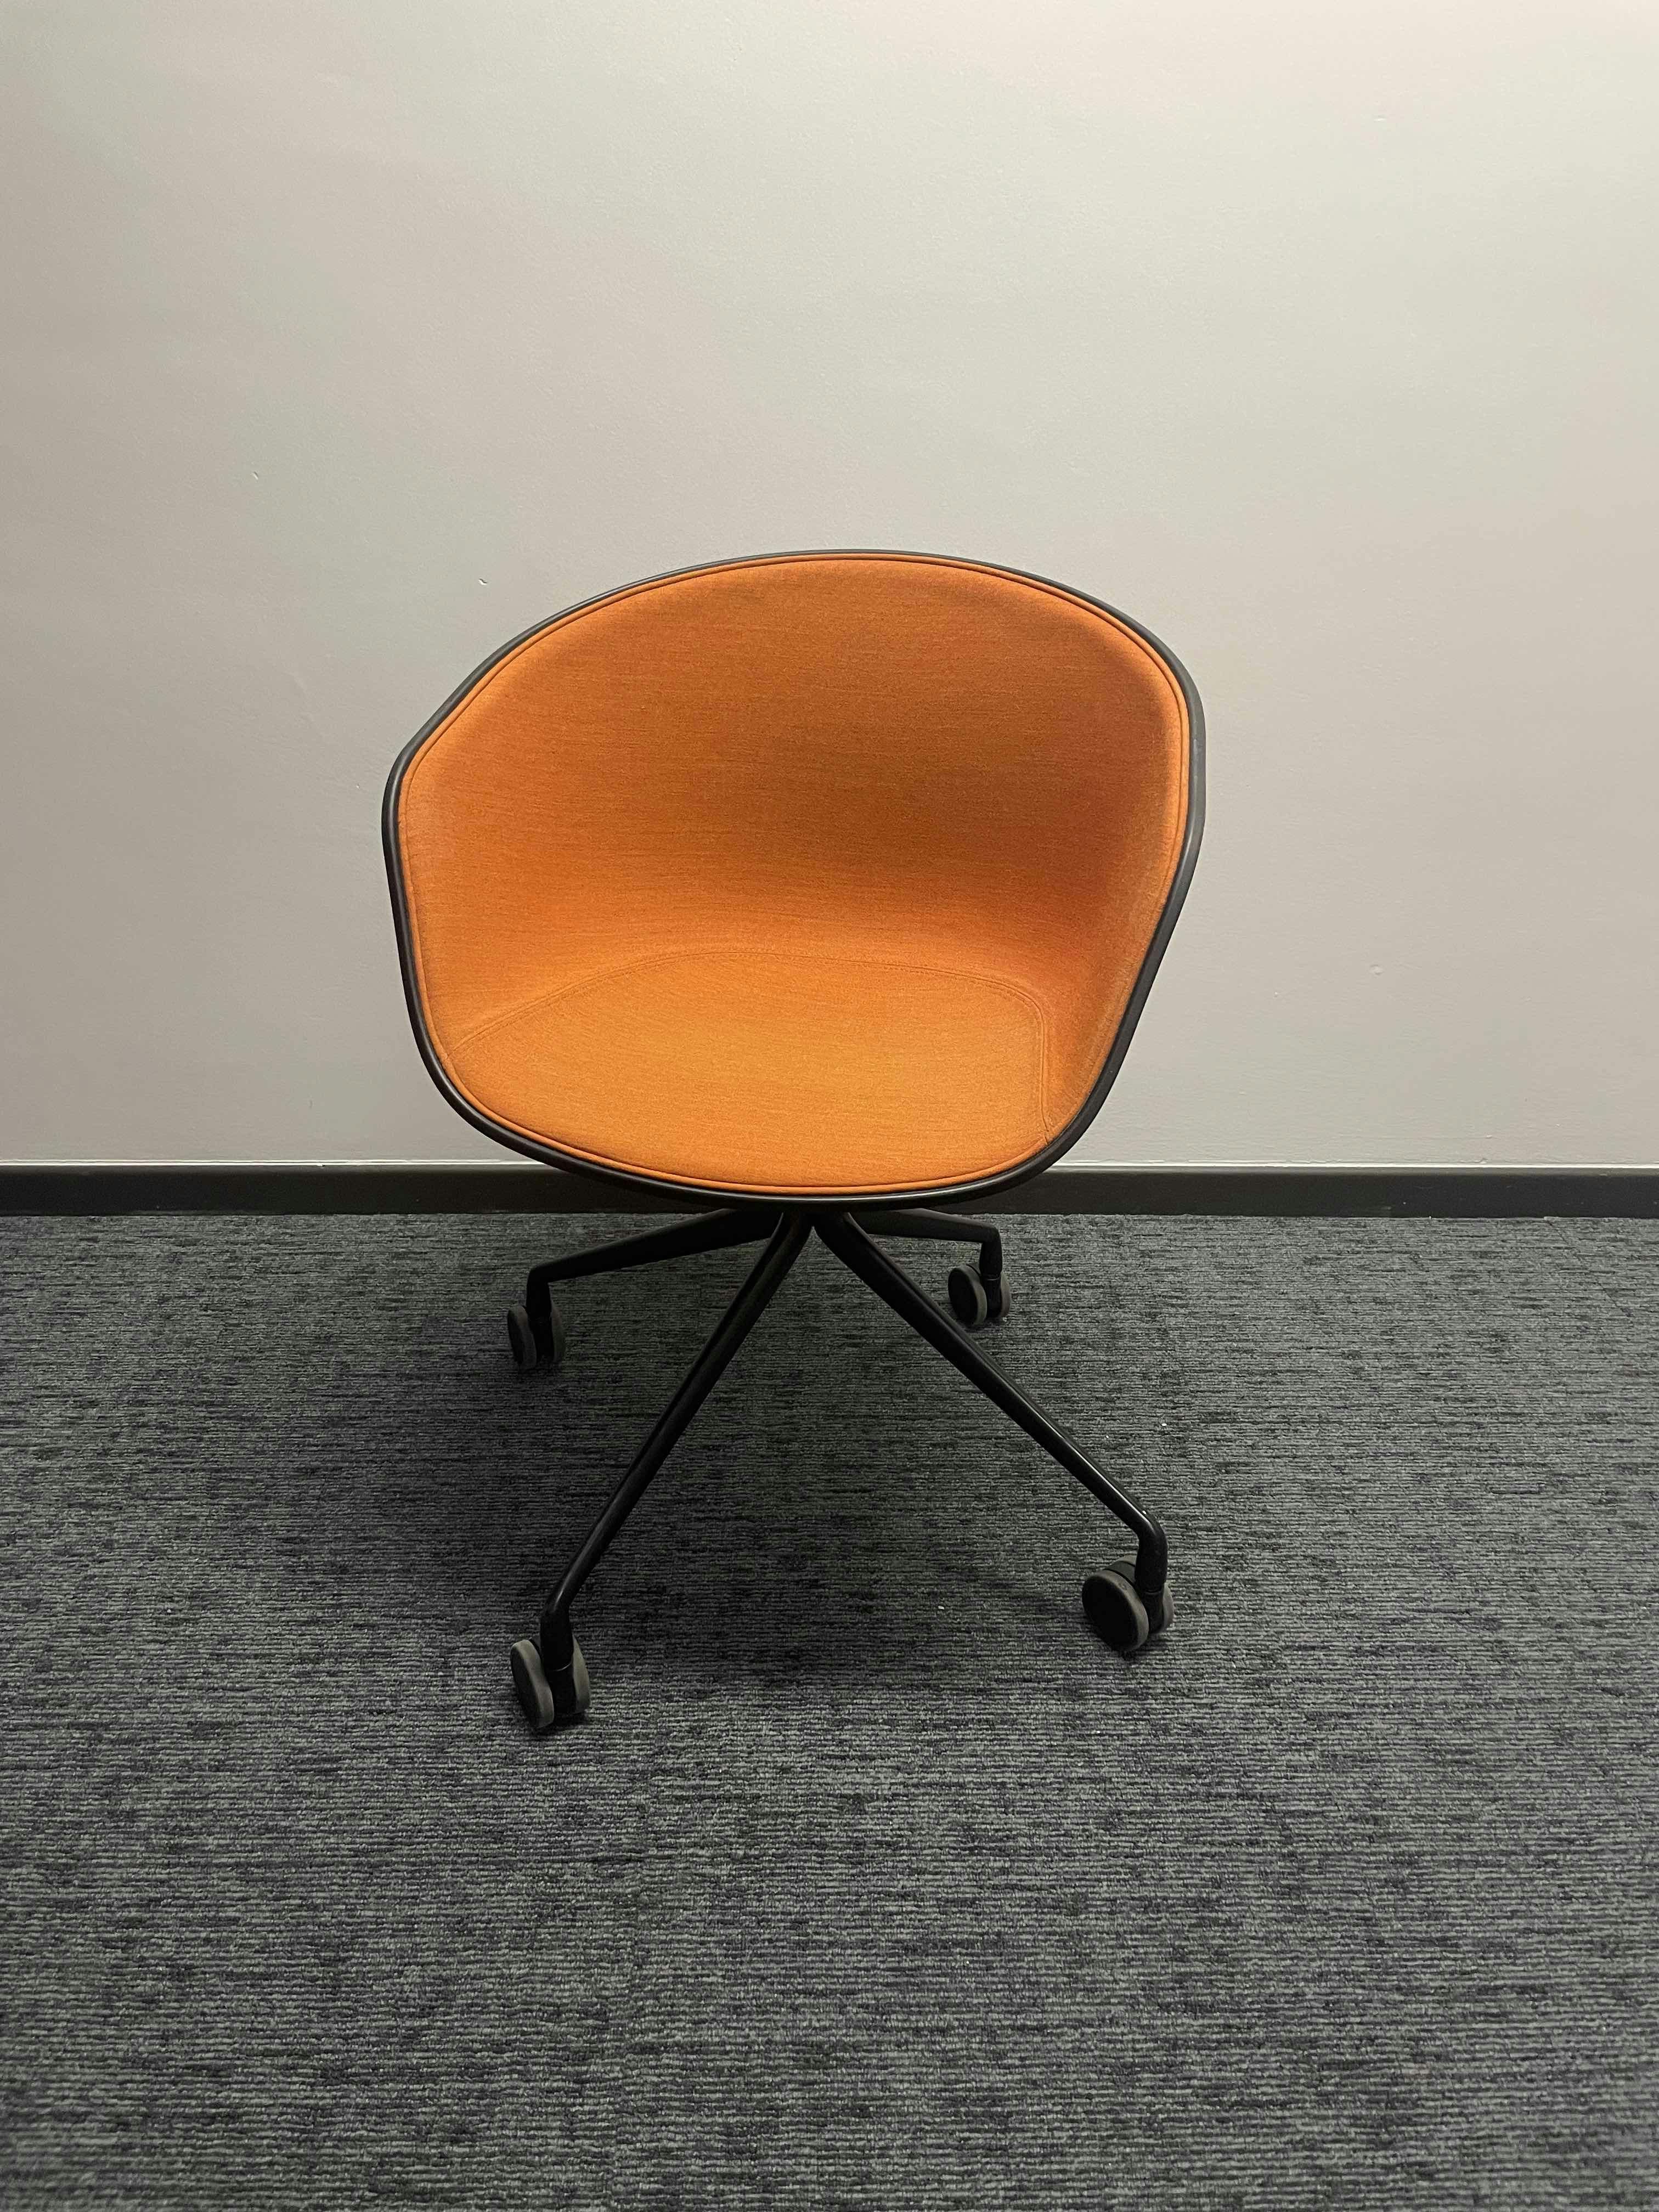 Orange and Black Chair Hay - Second hand quality "Chairs" - Relieve Furniture